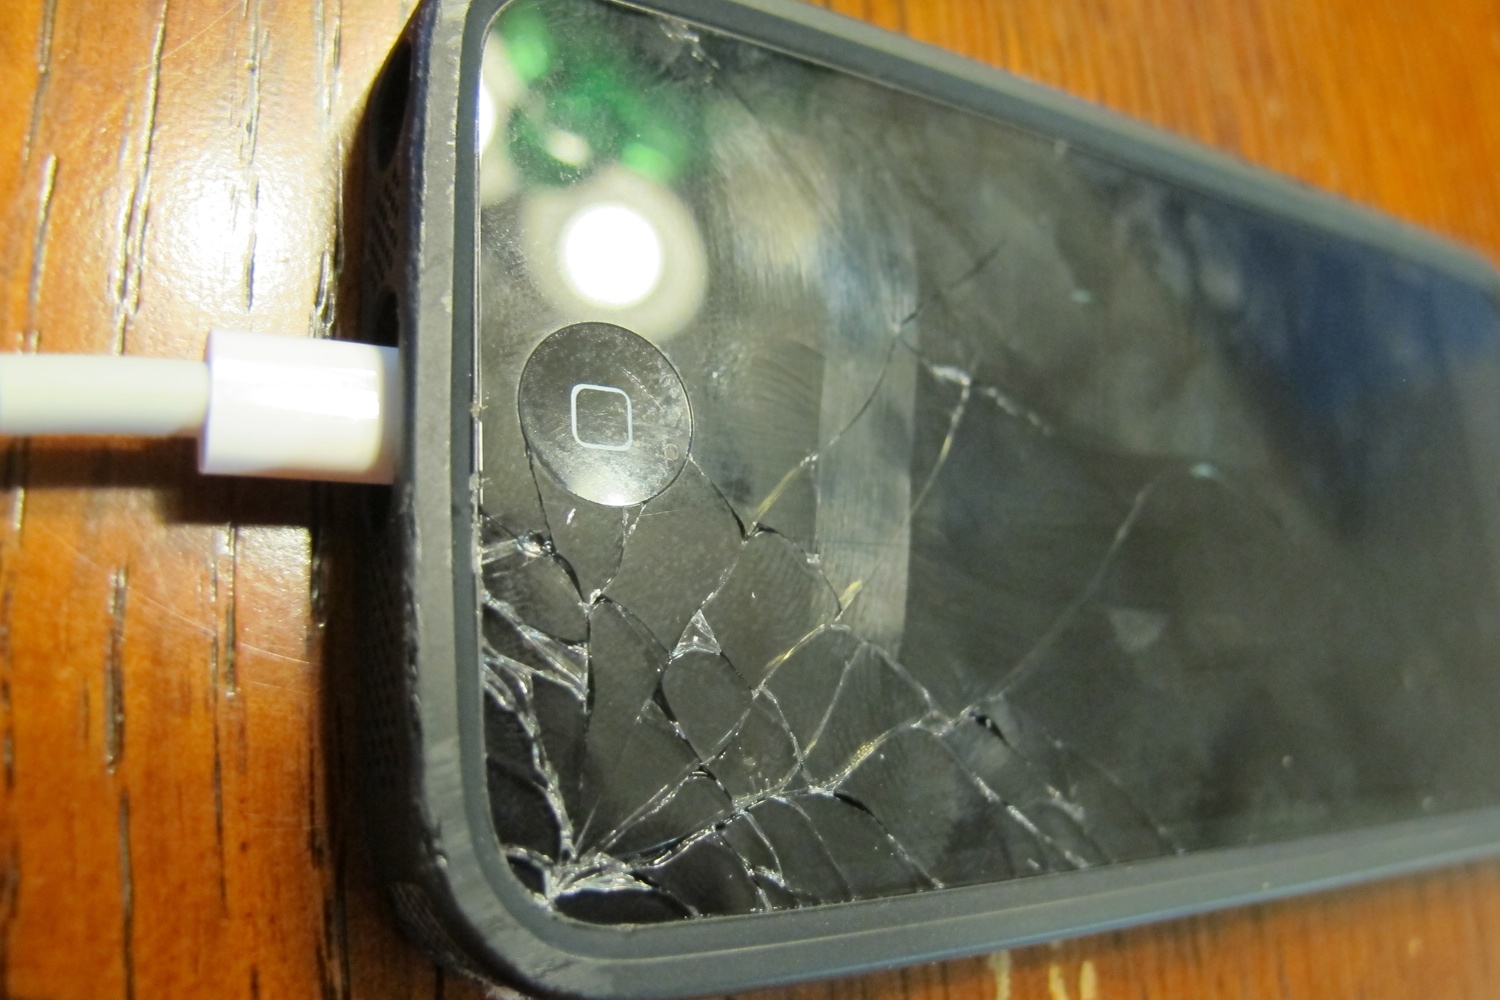 Apple may be on its way towards a scratch-proof screen for their iPhone. (Matt Peckham for TIME)